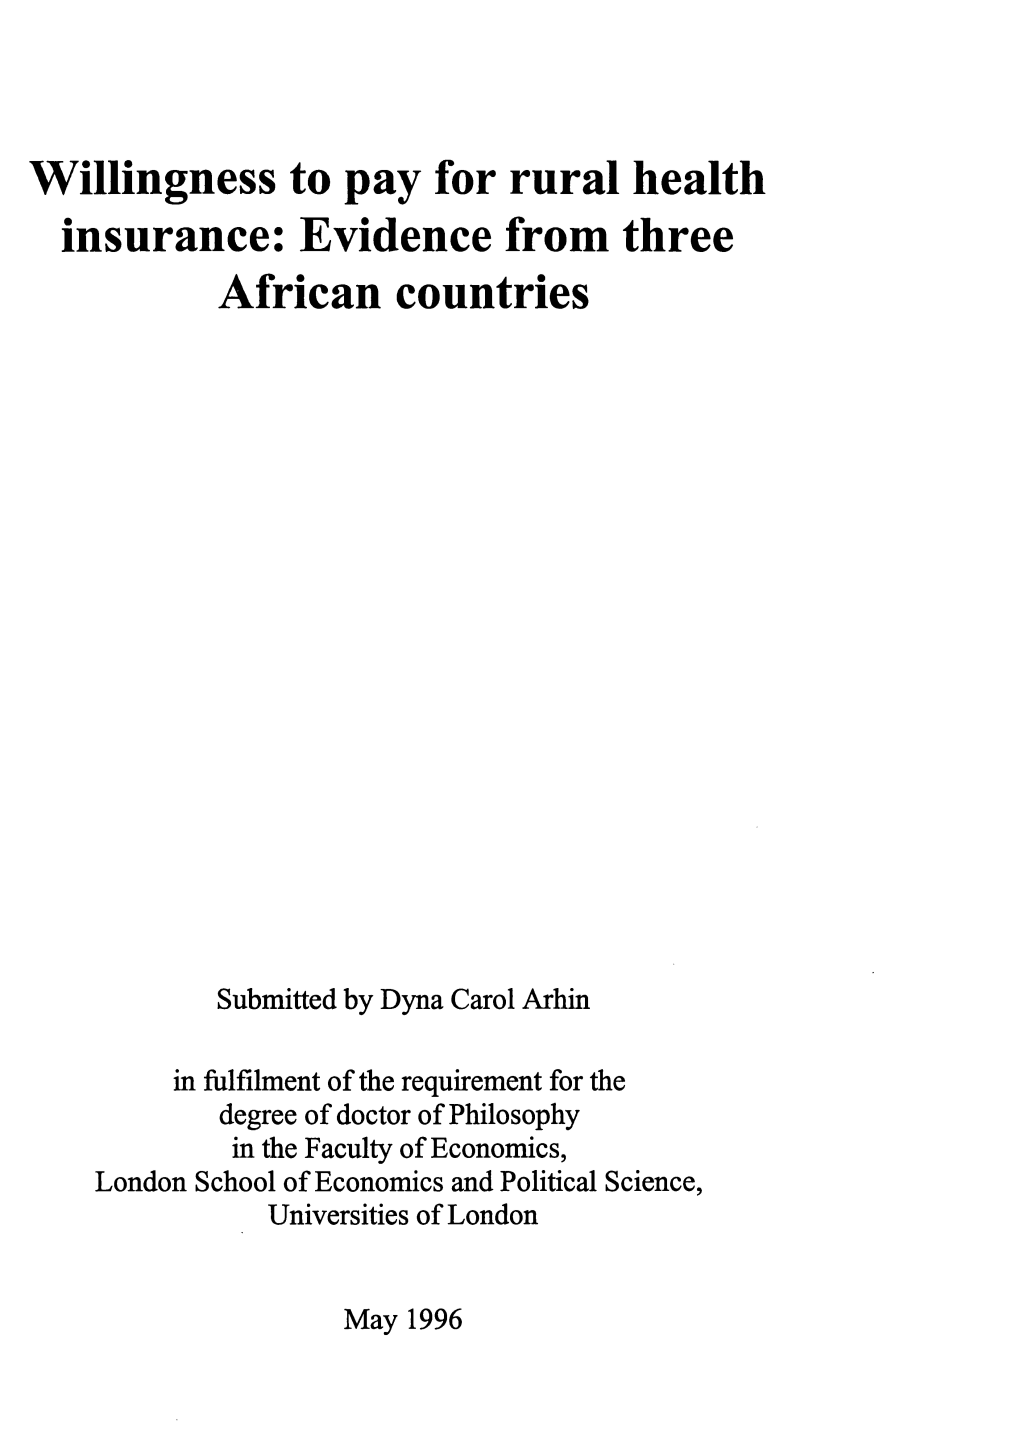 Willingness to Pay for Rural Health Insurance: Evidence from Three African Countries